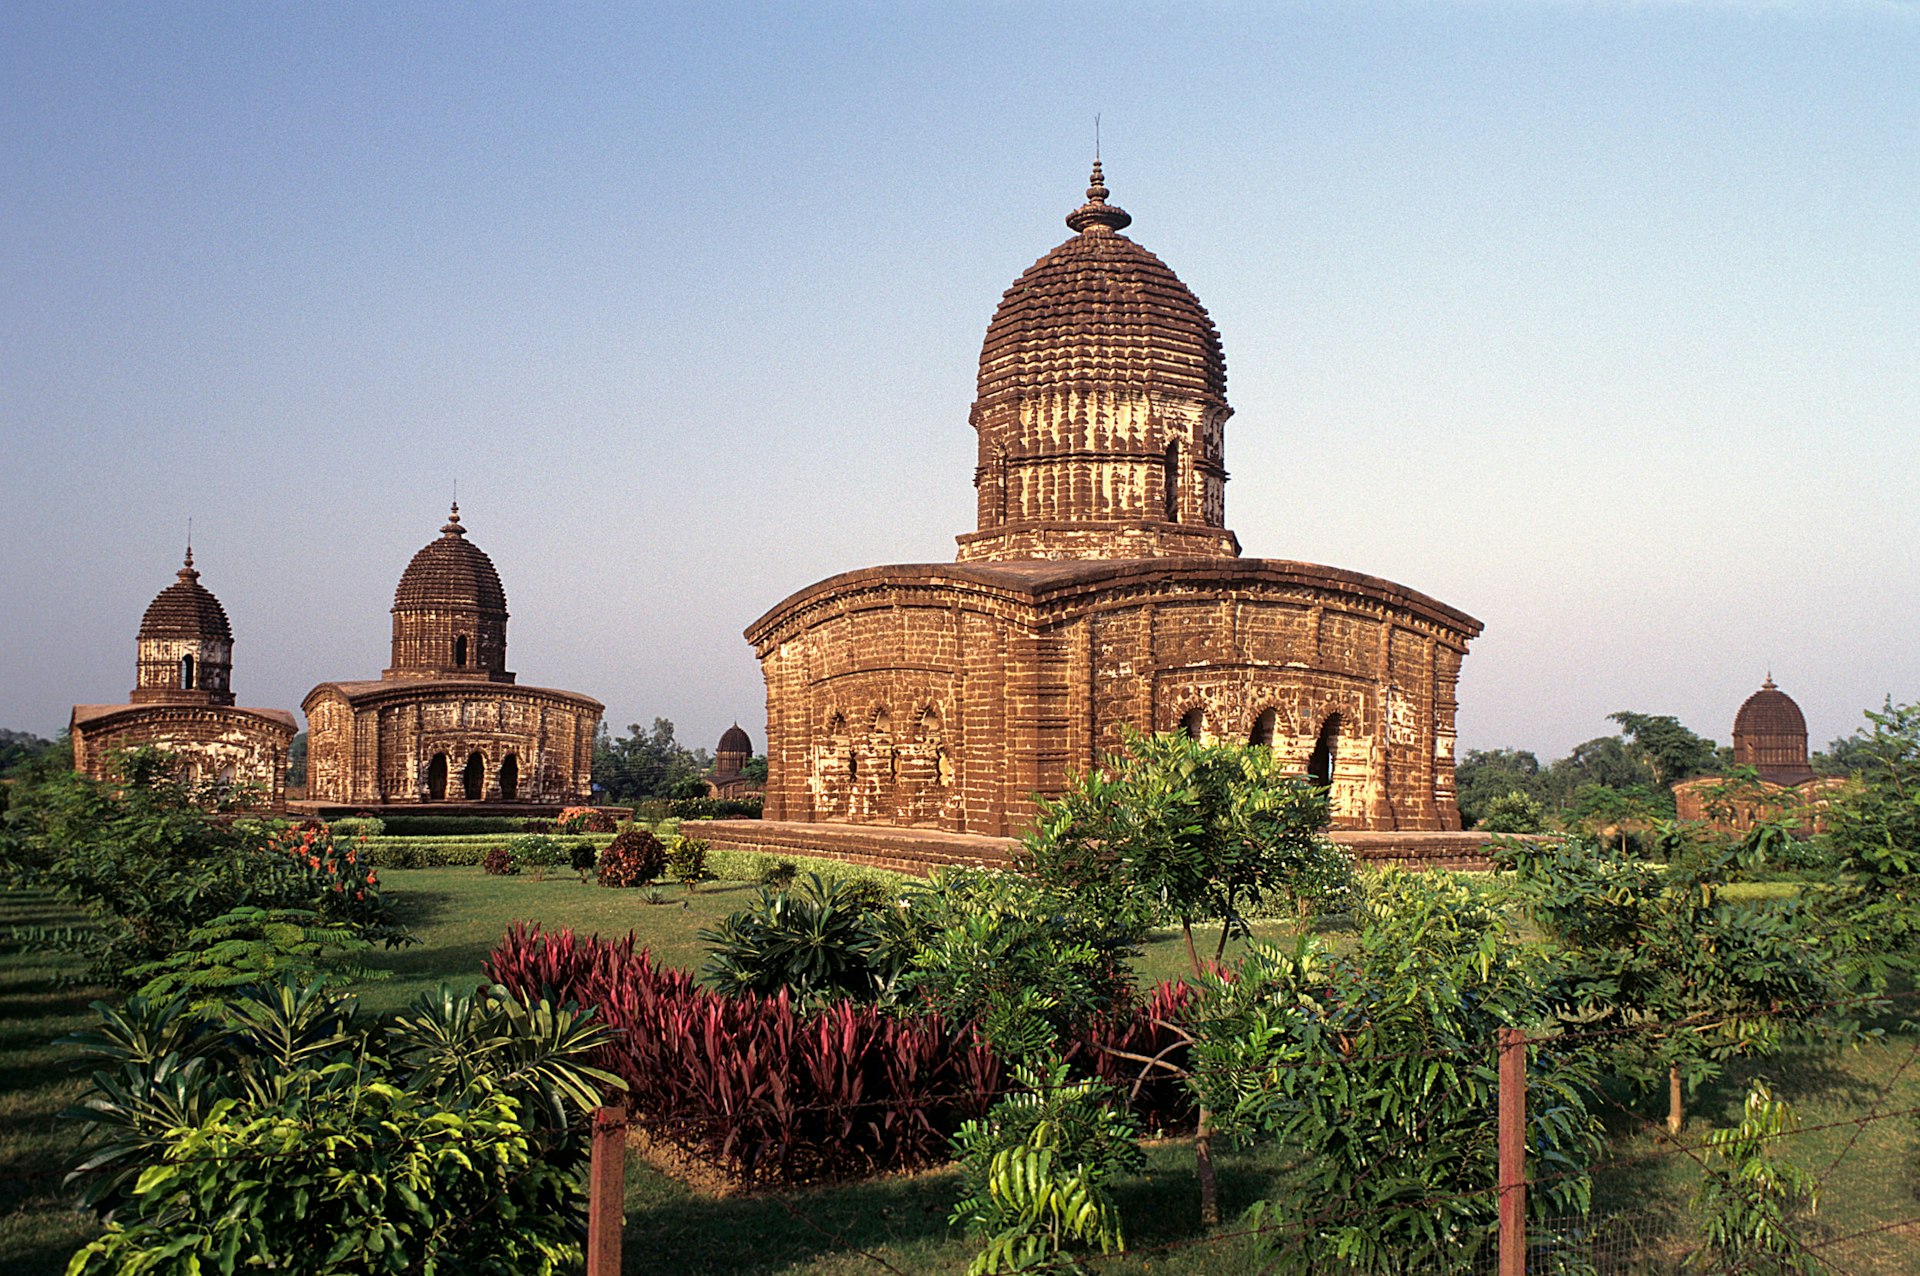 The terracotta temples of Bishnupur were built over three hundred years © IndiaPictures / Getty Images